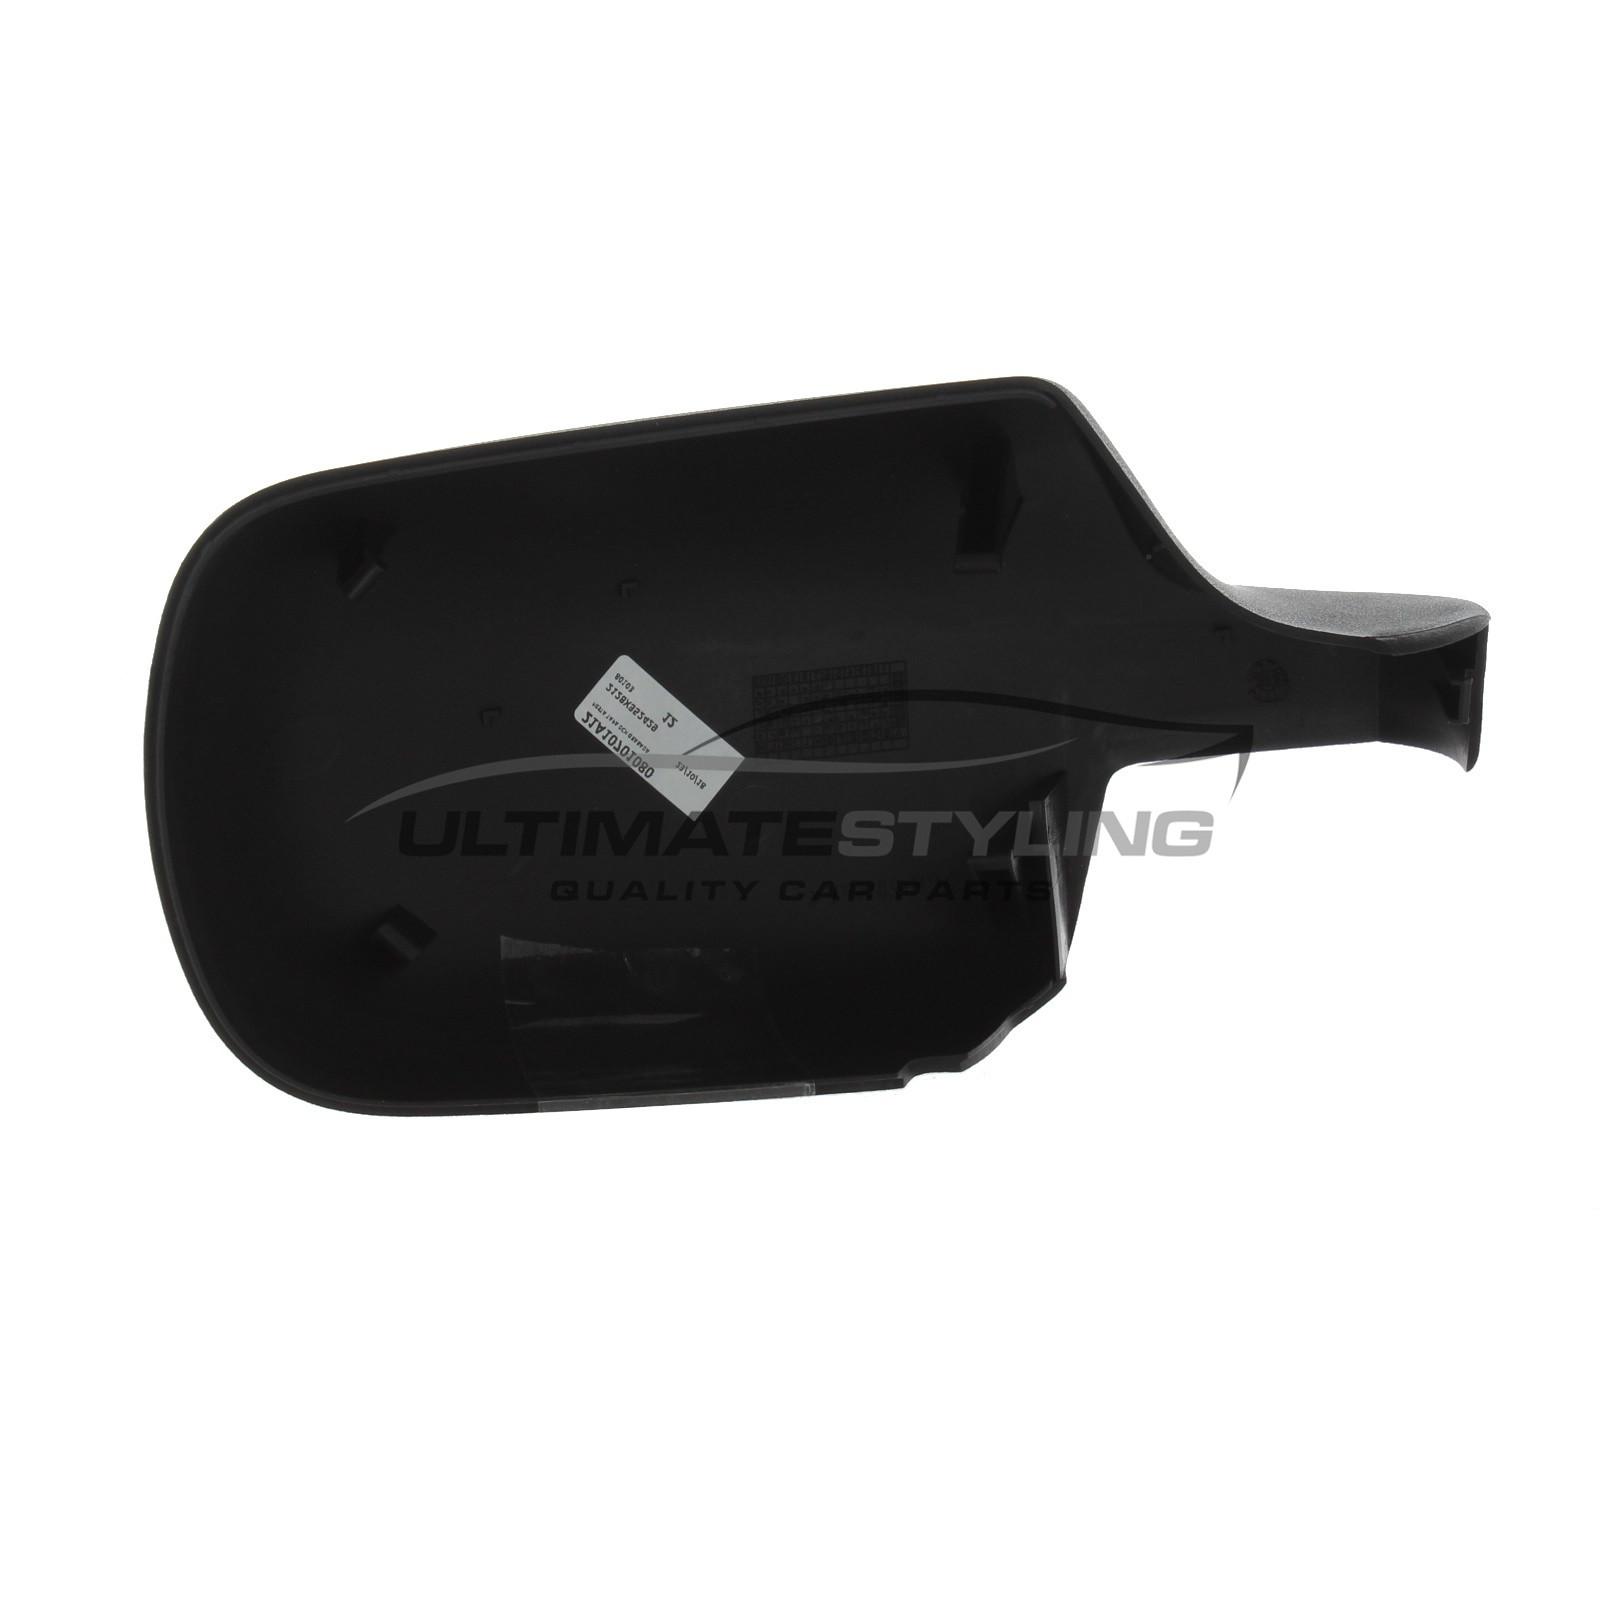 Textured For Passenger Side LH Ultimate Styling Aftermarket Replacement Wing Mirror Cover Cap Colour Of Cover Black Left Hand Side 